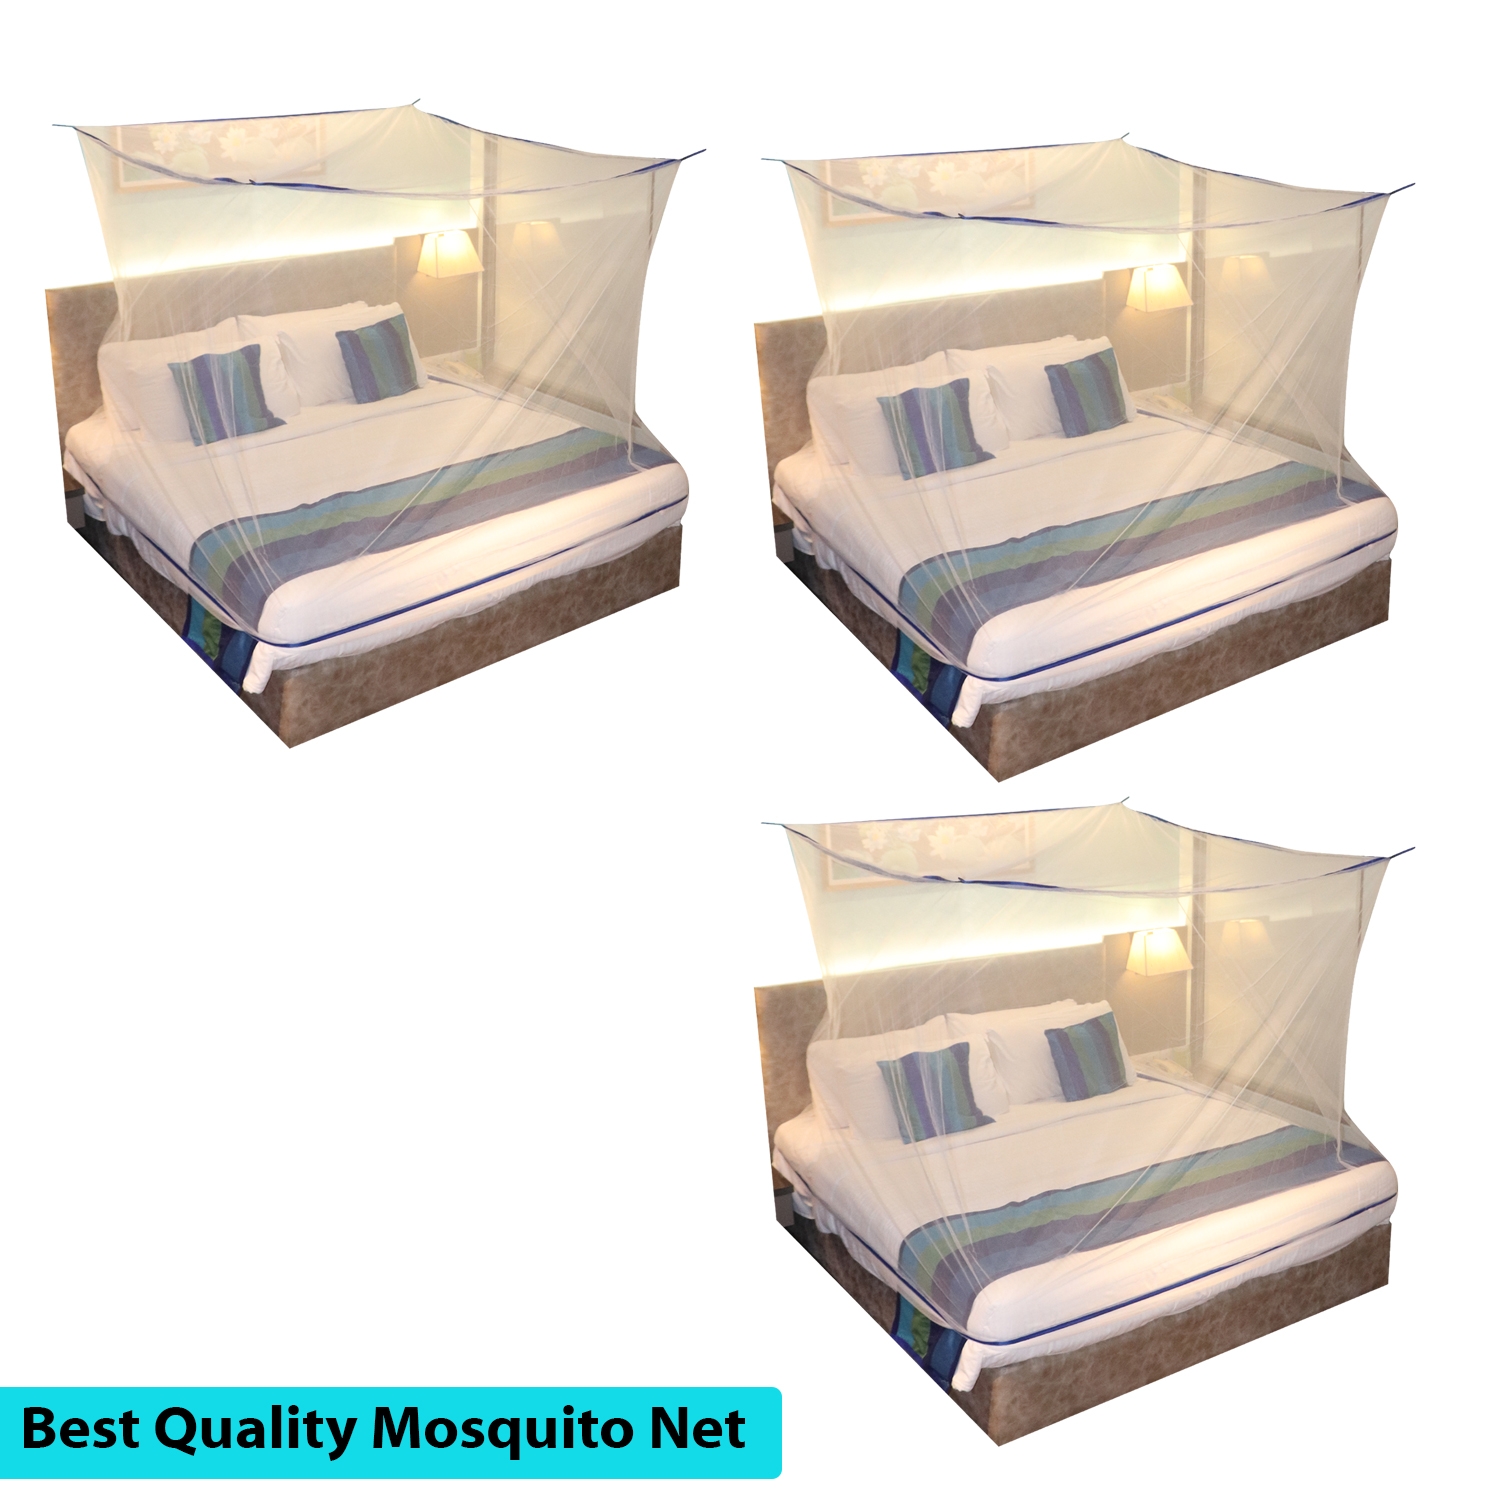 Paola Jewels | Mosquito Net for Double Bed, King-Size, Square Hanging Foldable Polyester Net White And BluePack of 3